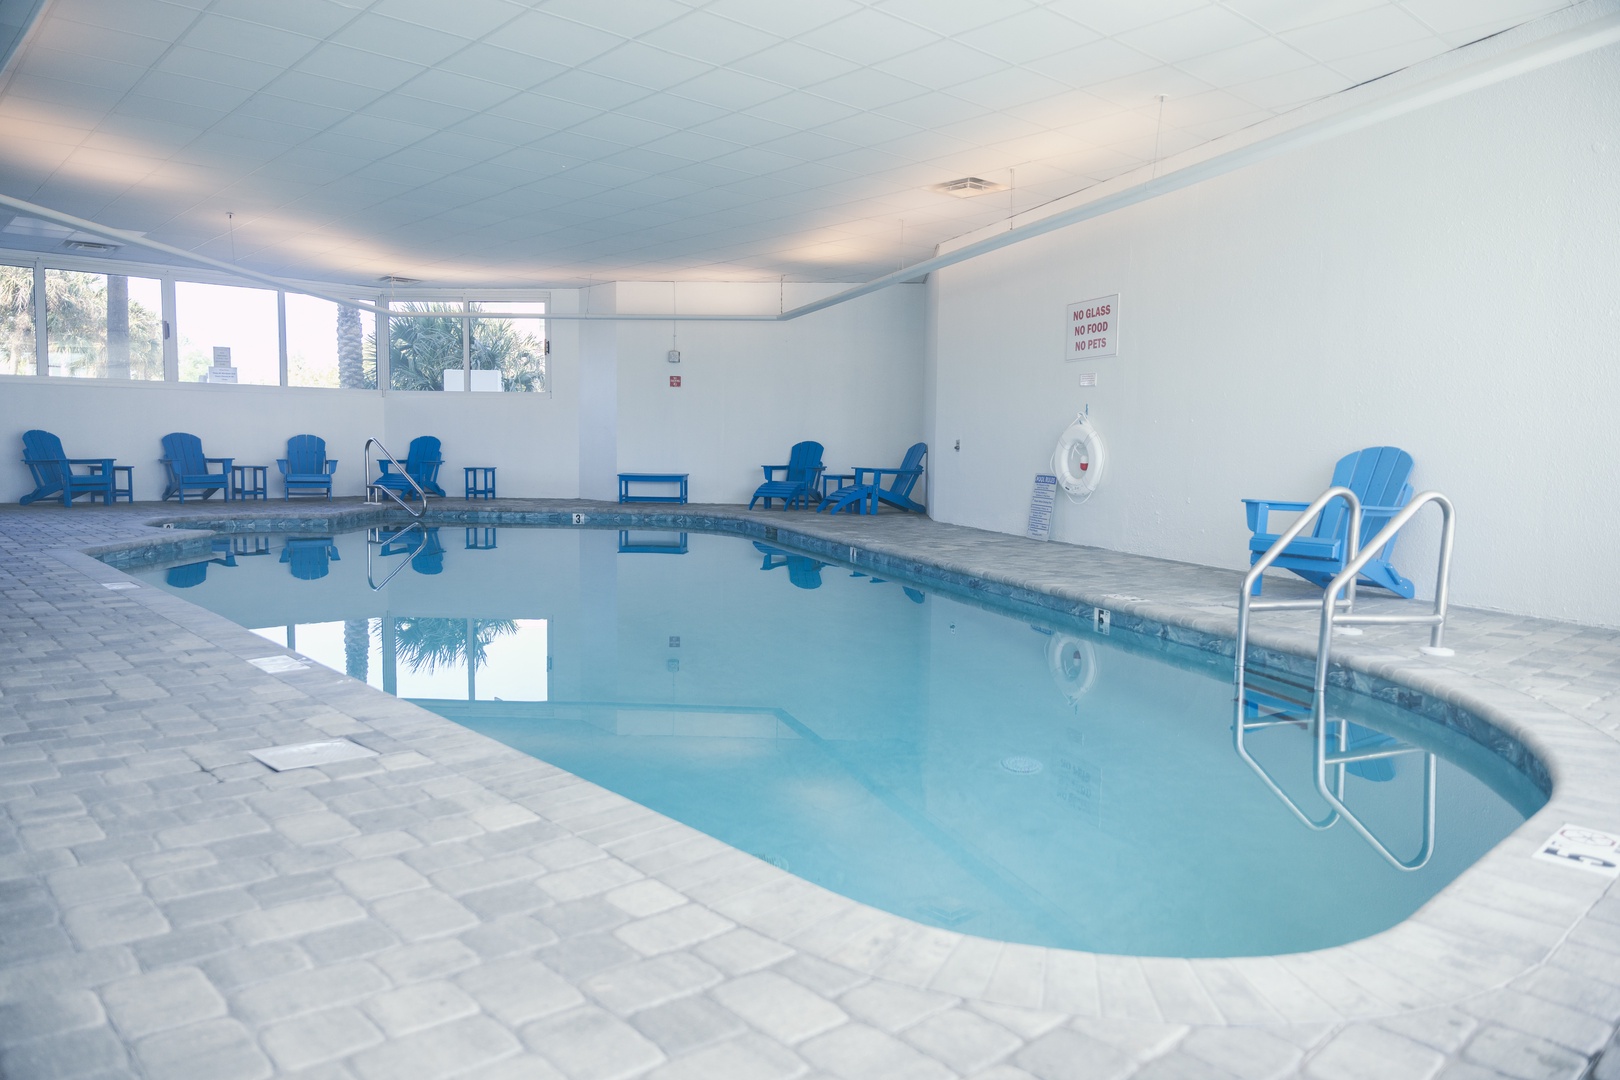 For those times when you just can't be outside, enjoy the heated indoor pool instead